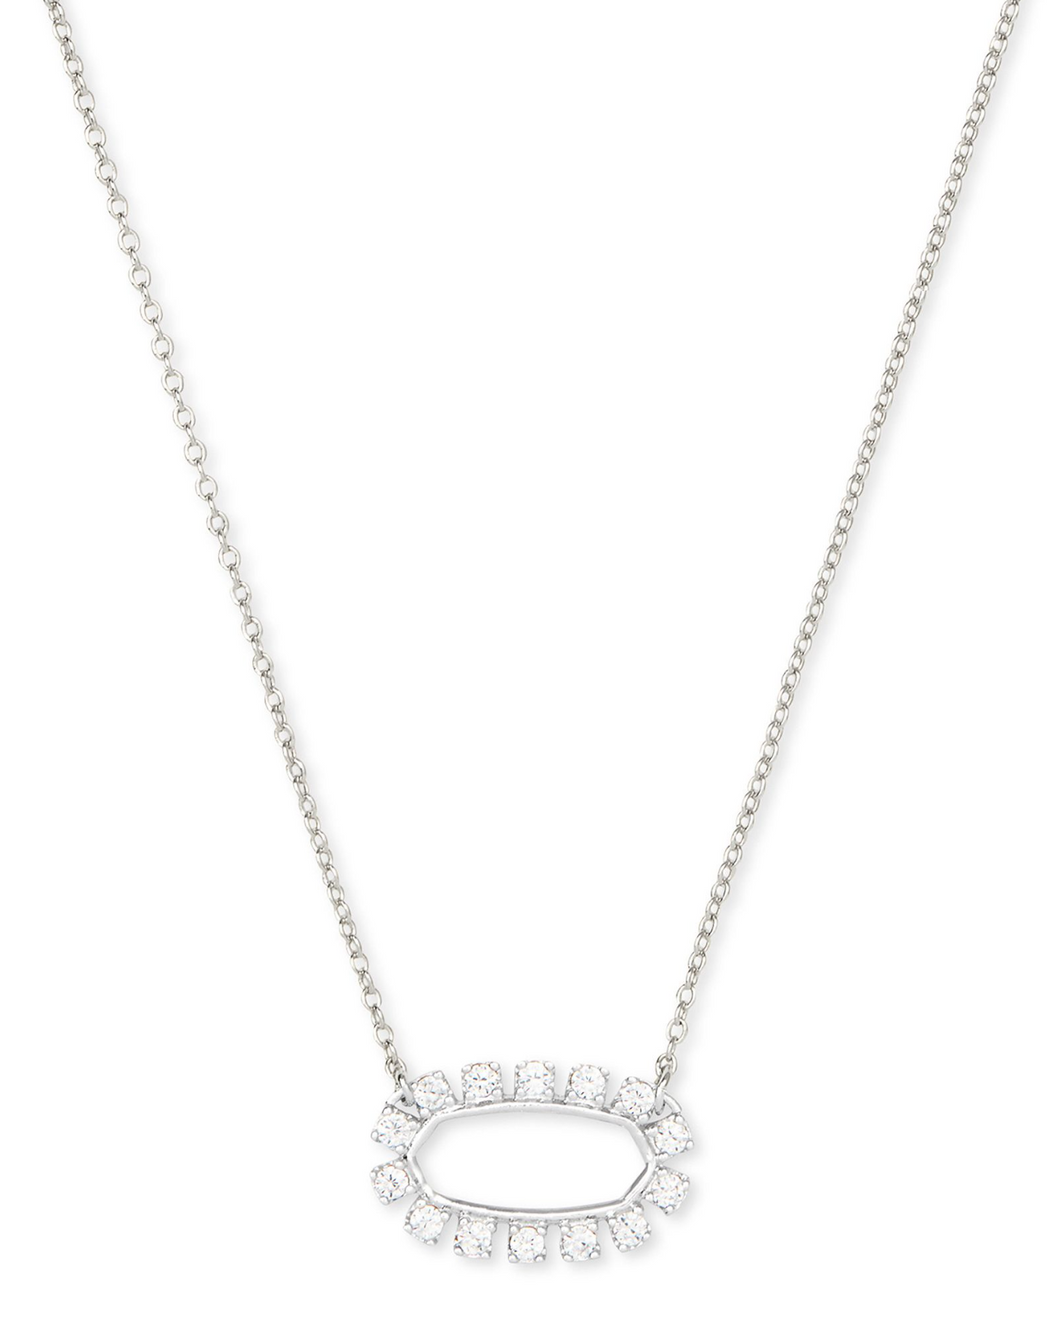 Elisa Open Frame Crystal Pendant Necklace in Silver by Kendra Scott